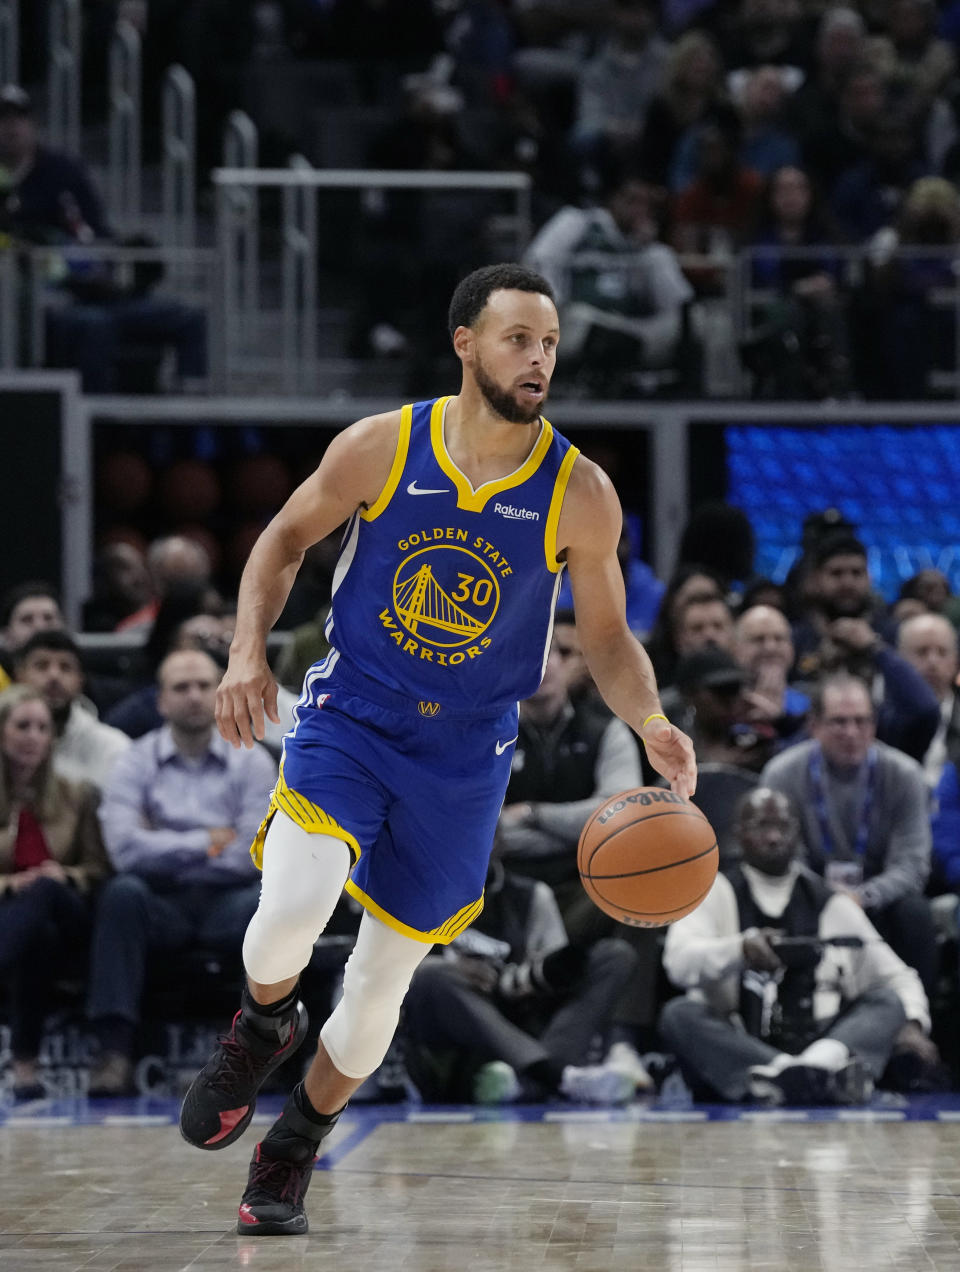 Golden State Warriors guard Stephen Curry brings the ball up court during the second half of an NBA basketball game against the Detroit Pistons, Monday, Nov. 6, 2023, in Detroit. (AP Photo/Carlos Osorio)